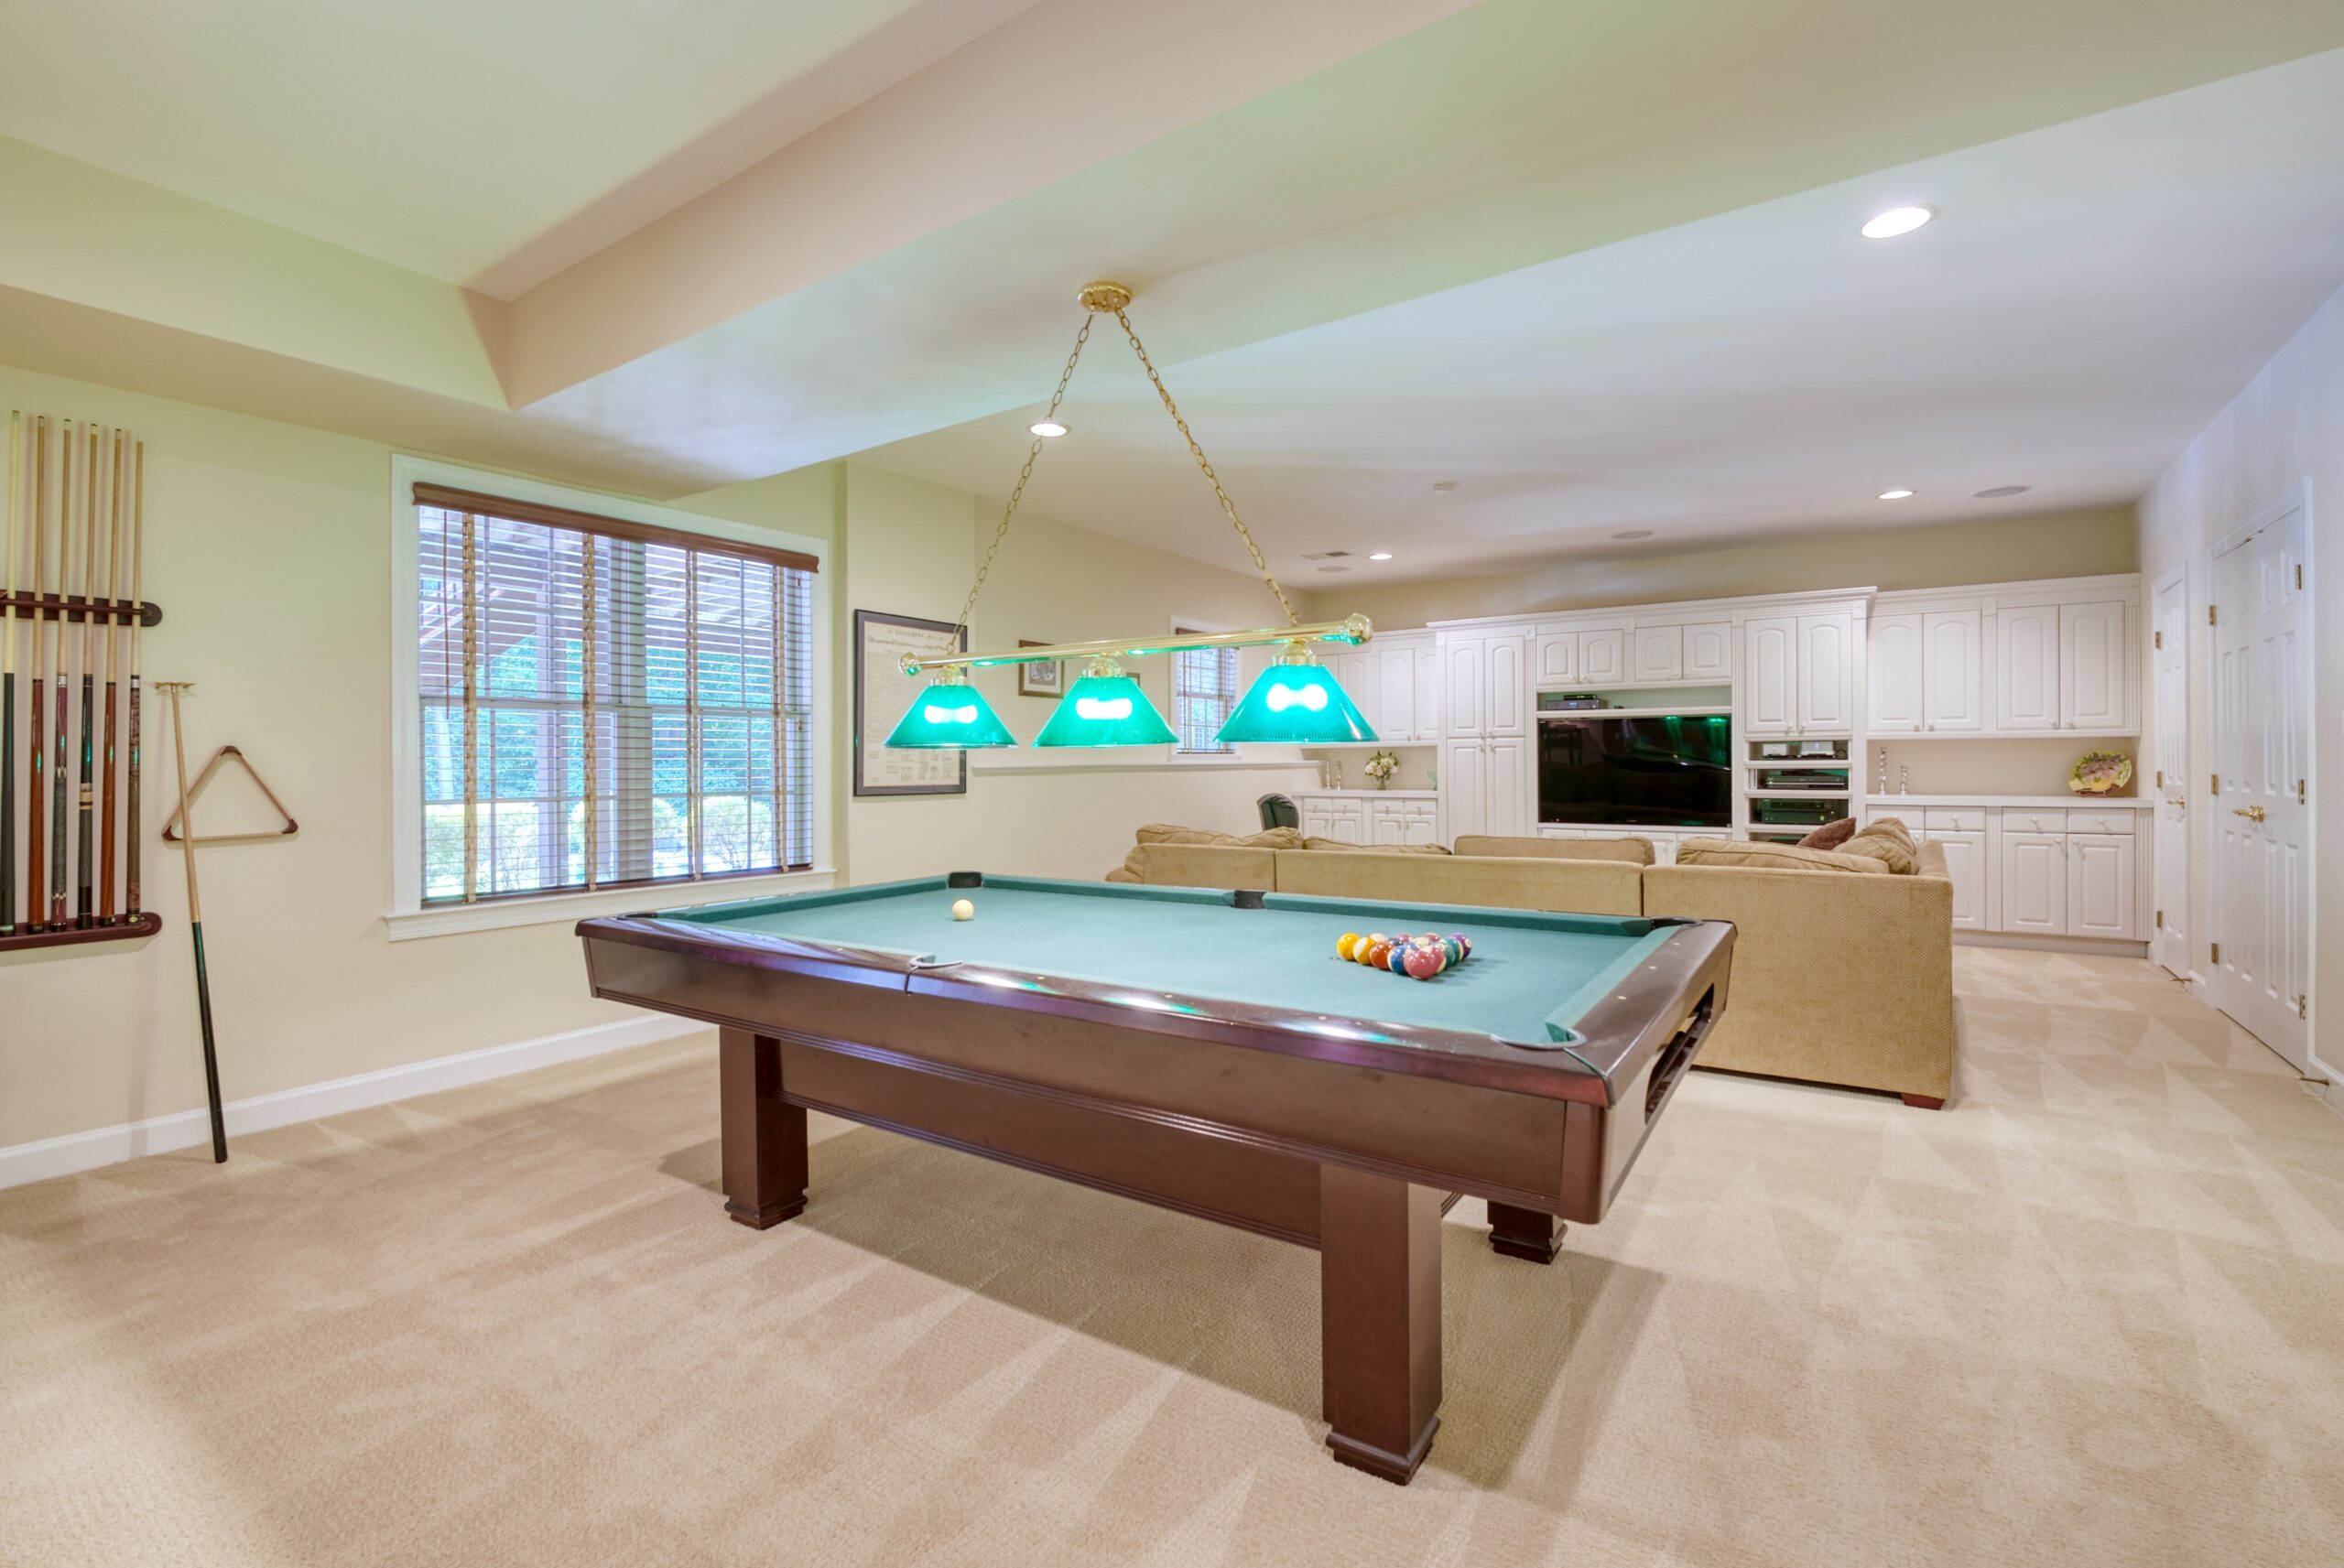 Finished basement with billiards table in the foreground and living TV area in the background, with built-in white cabinets around the TV. 10703 Ox Croft Ct, Fairfax Station, VA